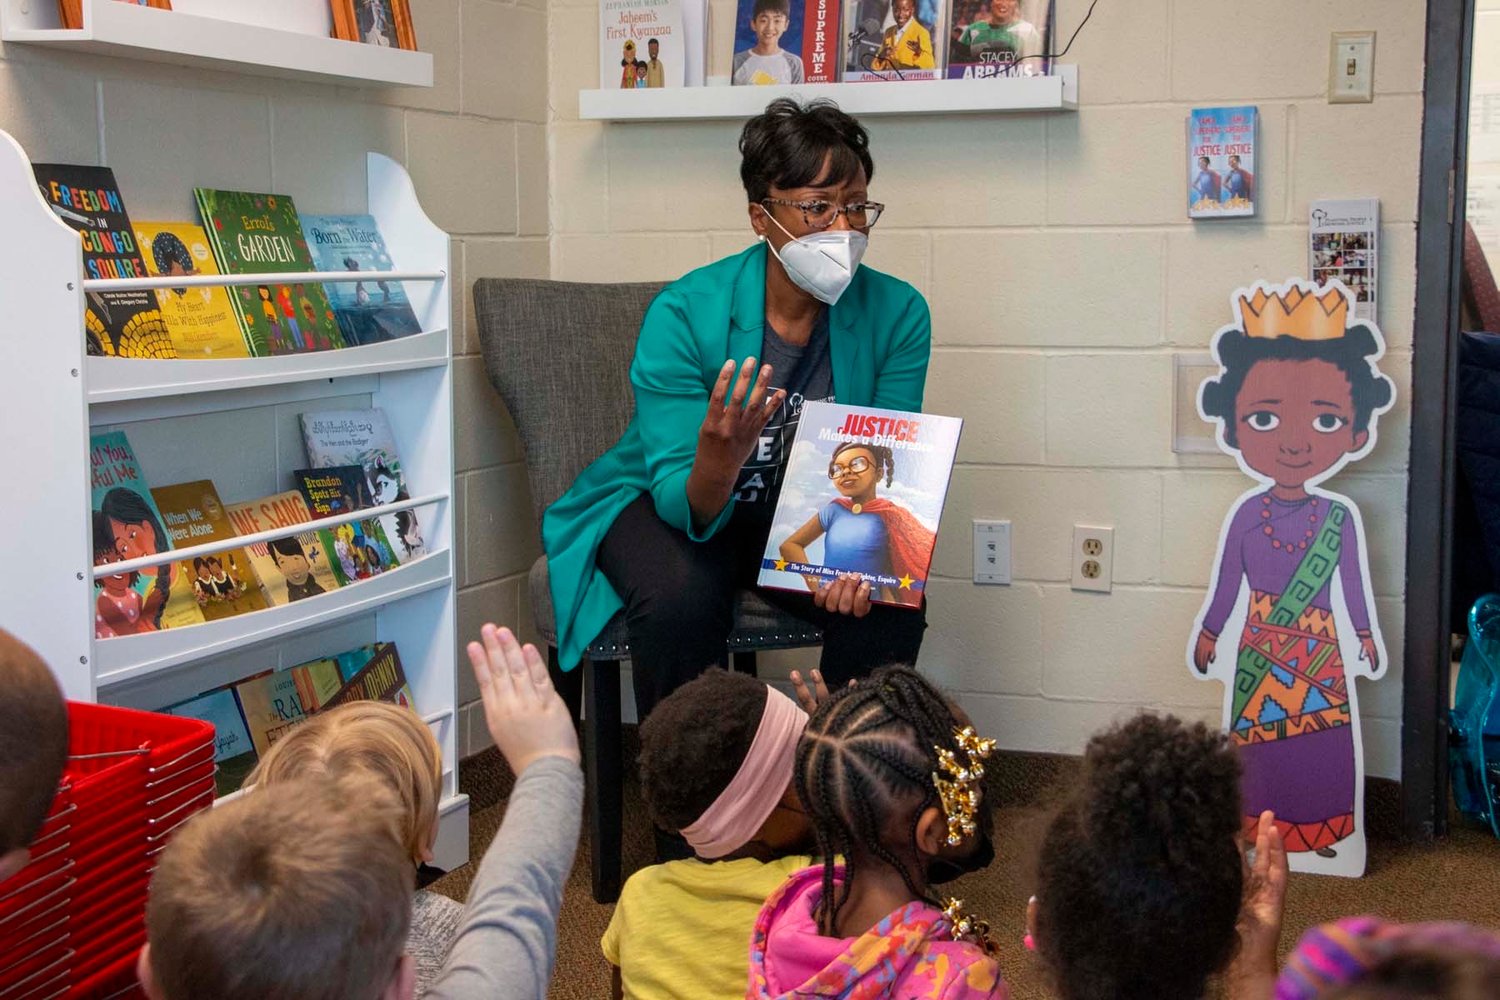 Artika Tyner reads “Justice Makes a Difference” to preschoolers at the Wilder Child Development Center, which is the home of the new R.A.W. library. (Photo submitted)